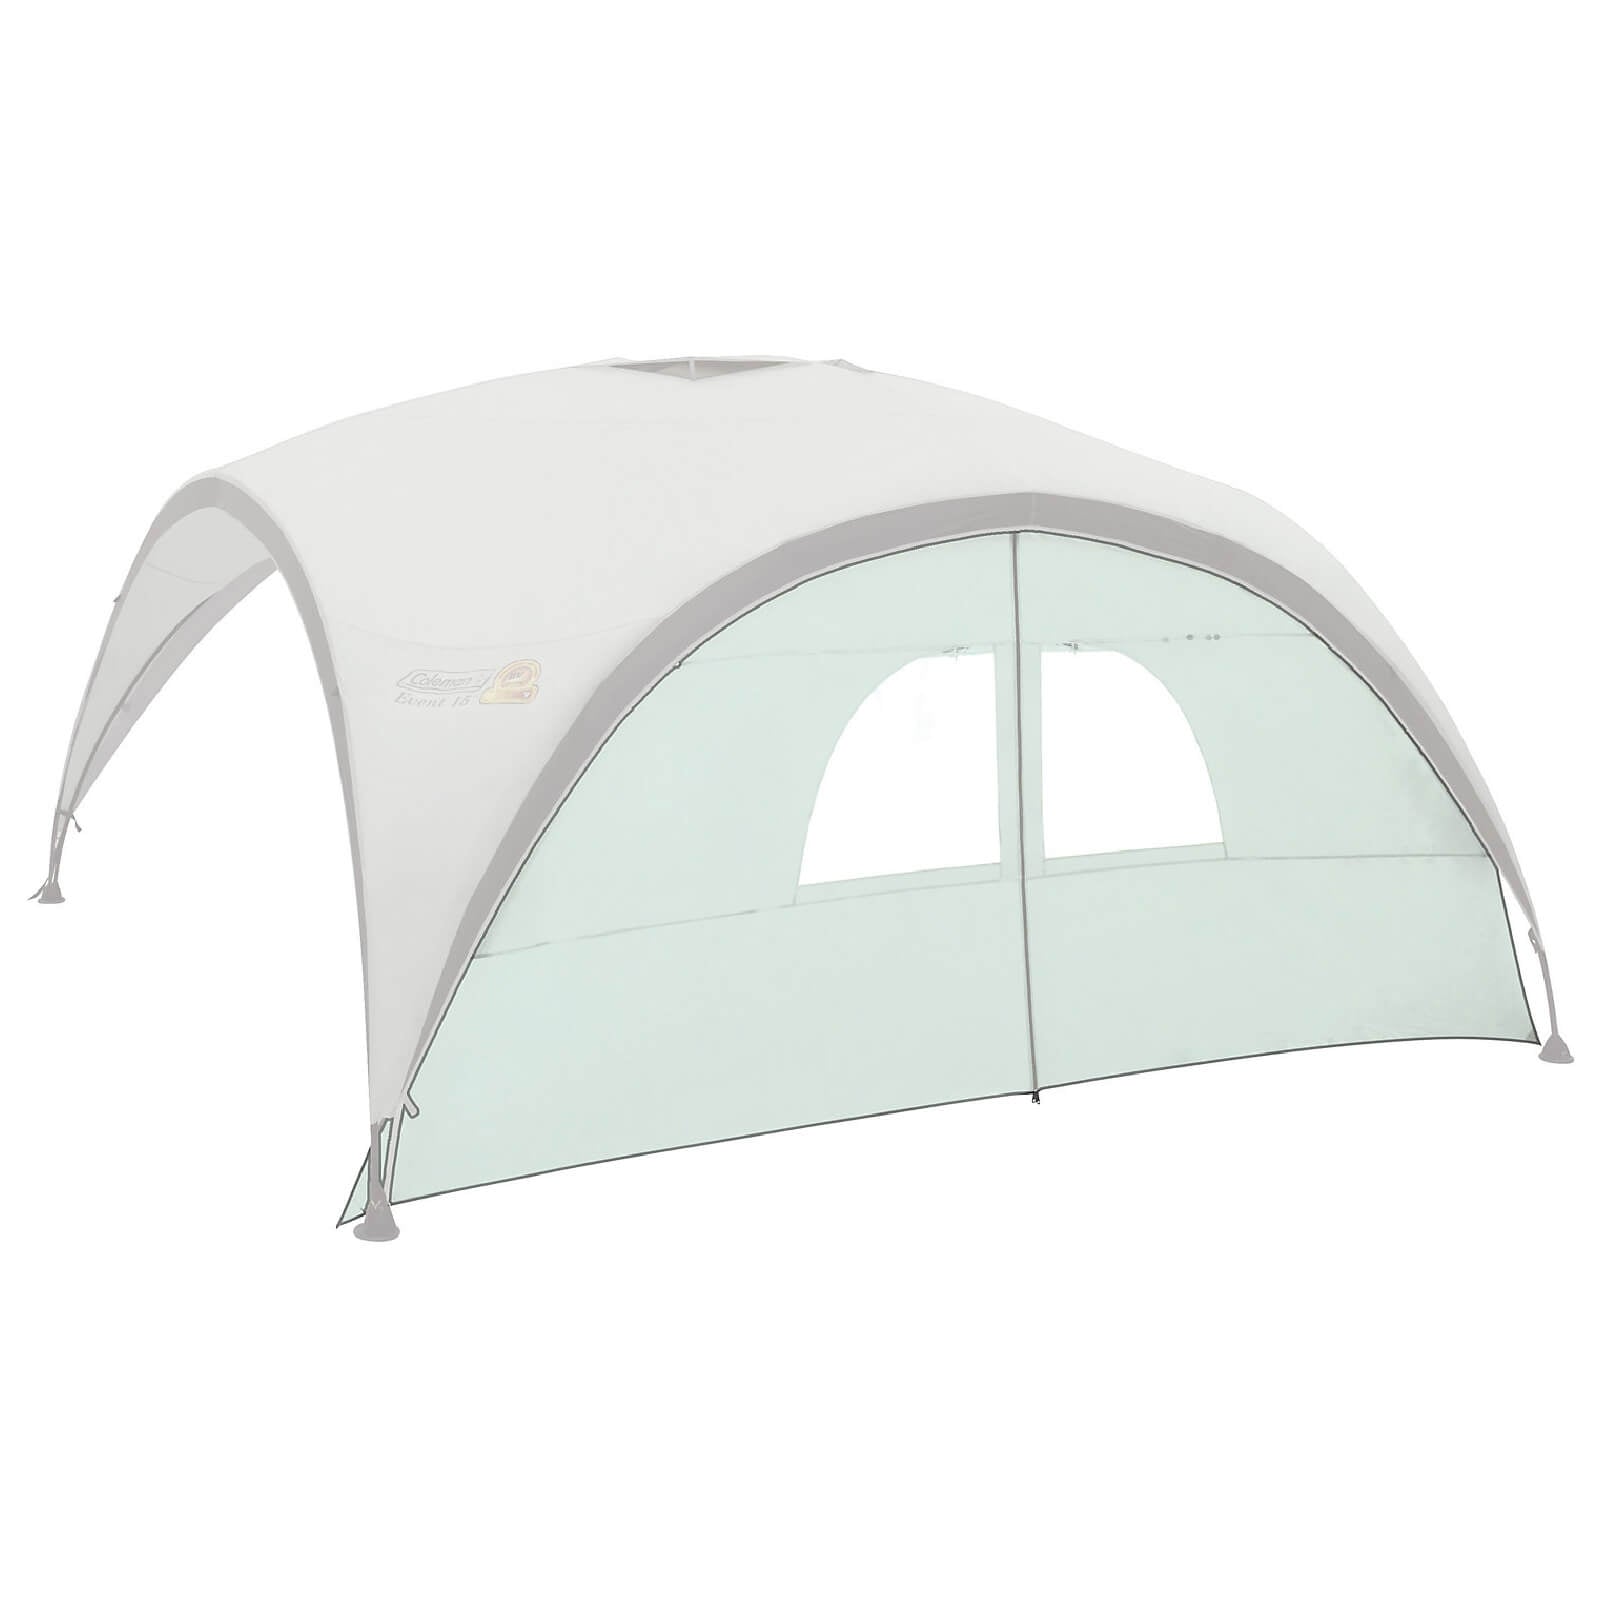 Camping Tent Spare Part Coleman Sunwall With Door for FastPitch Event Shelter Pro ForxLarge